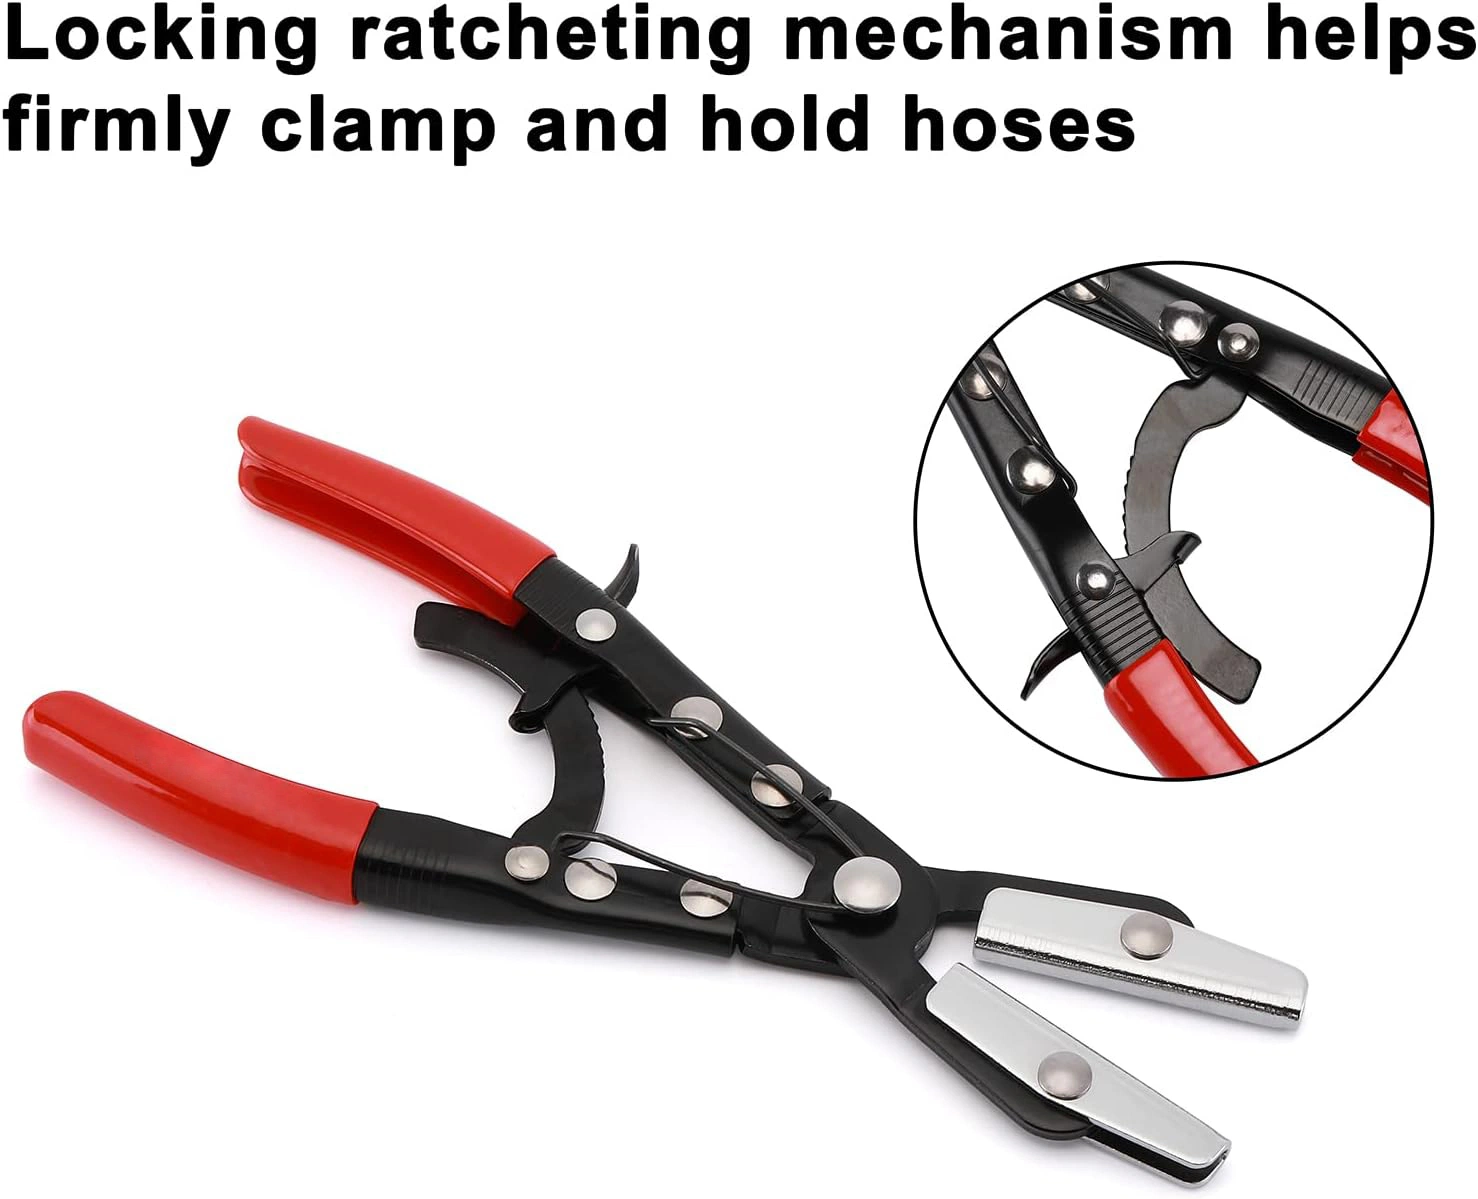 Hose Pinch off Pliers for Automotive Hose Lines, Radiator Lines